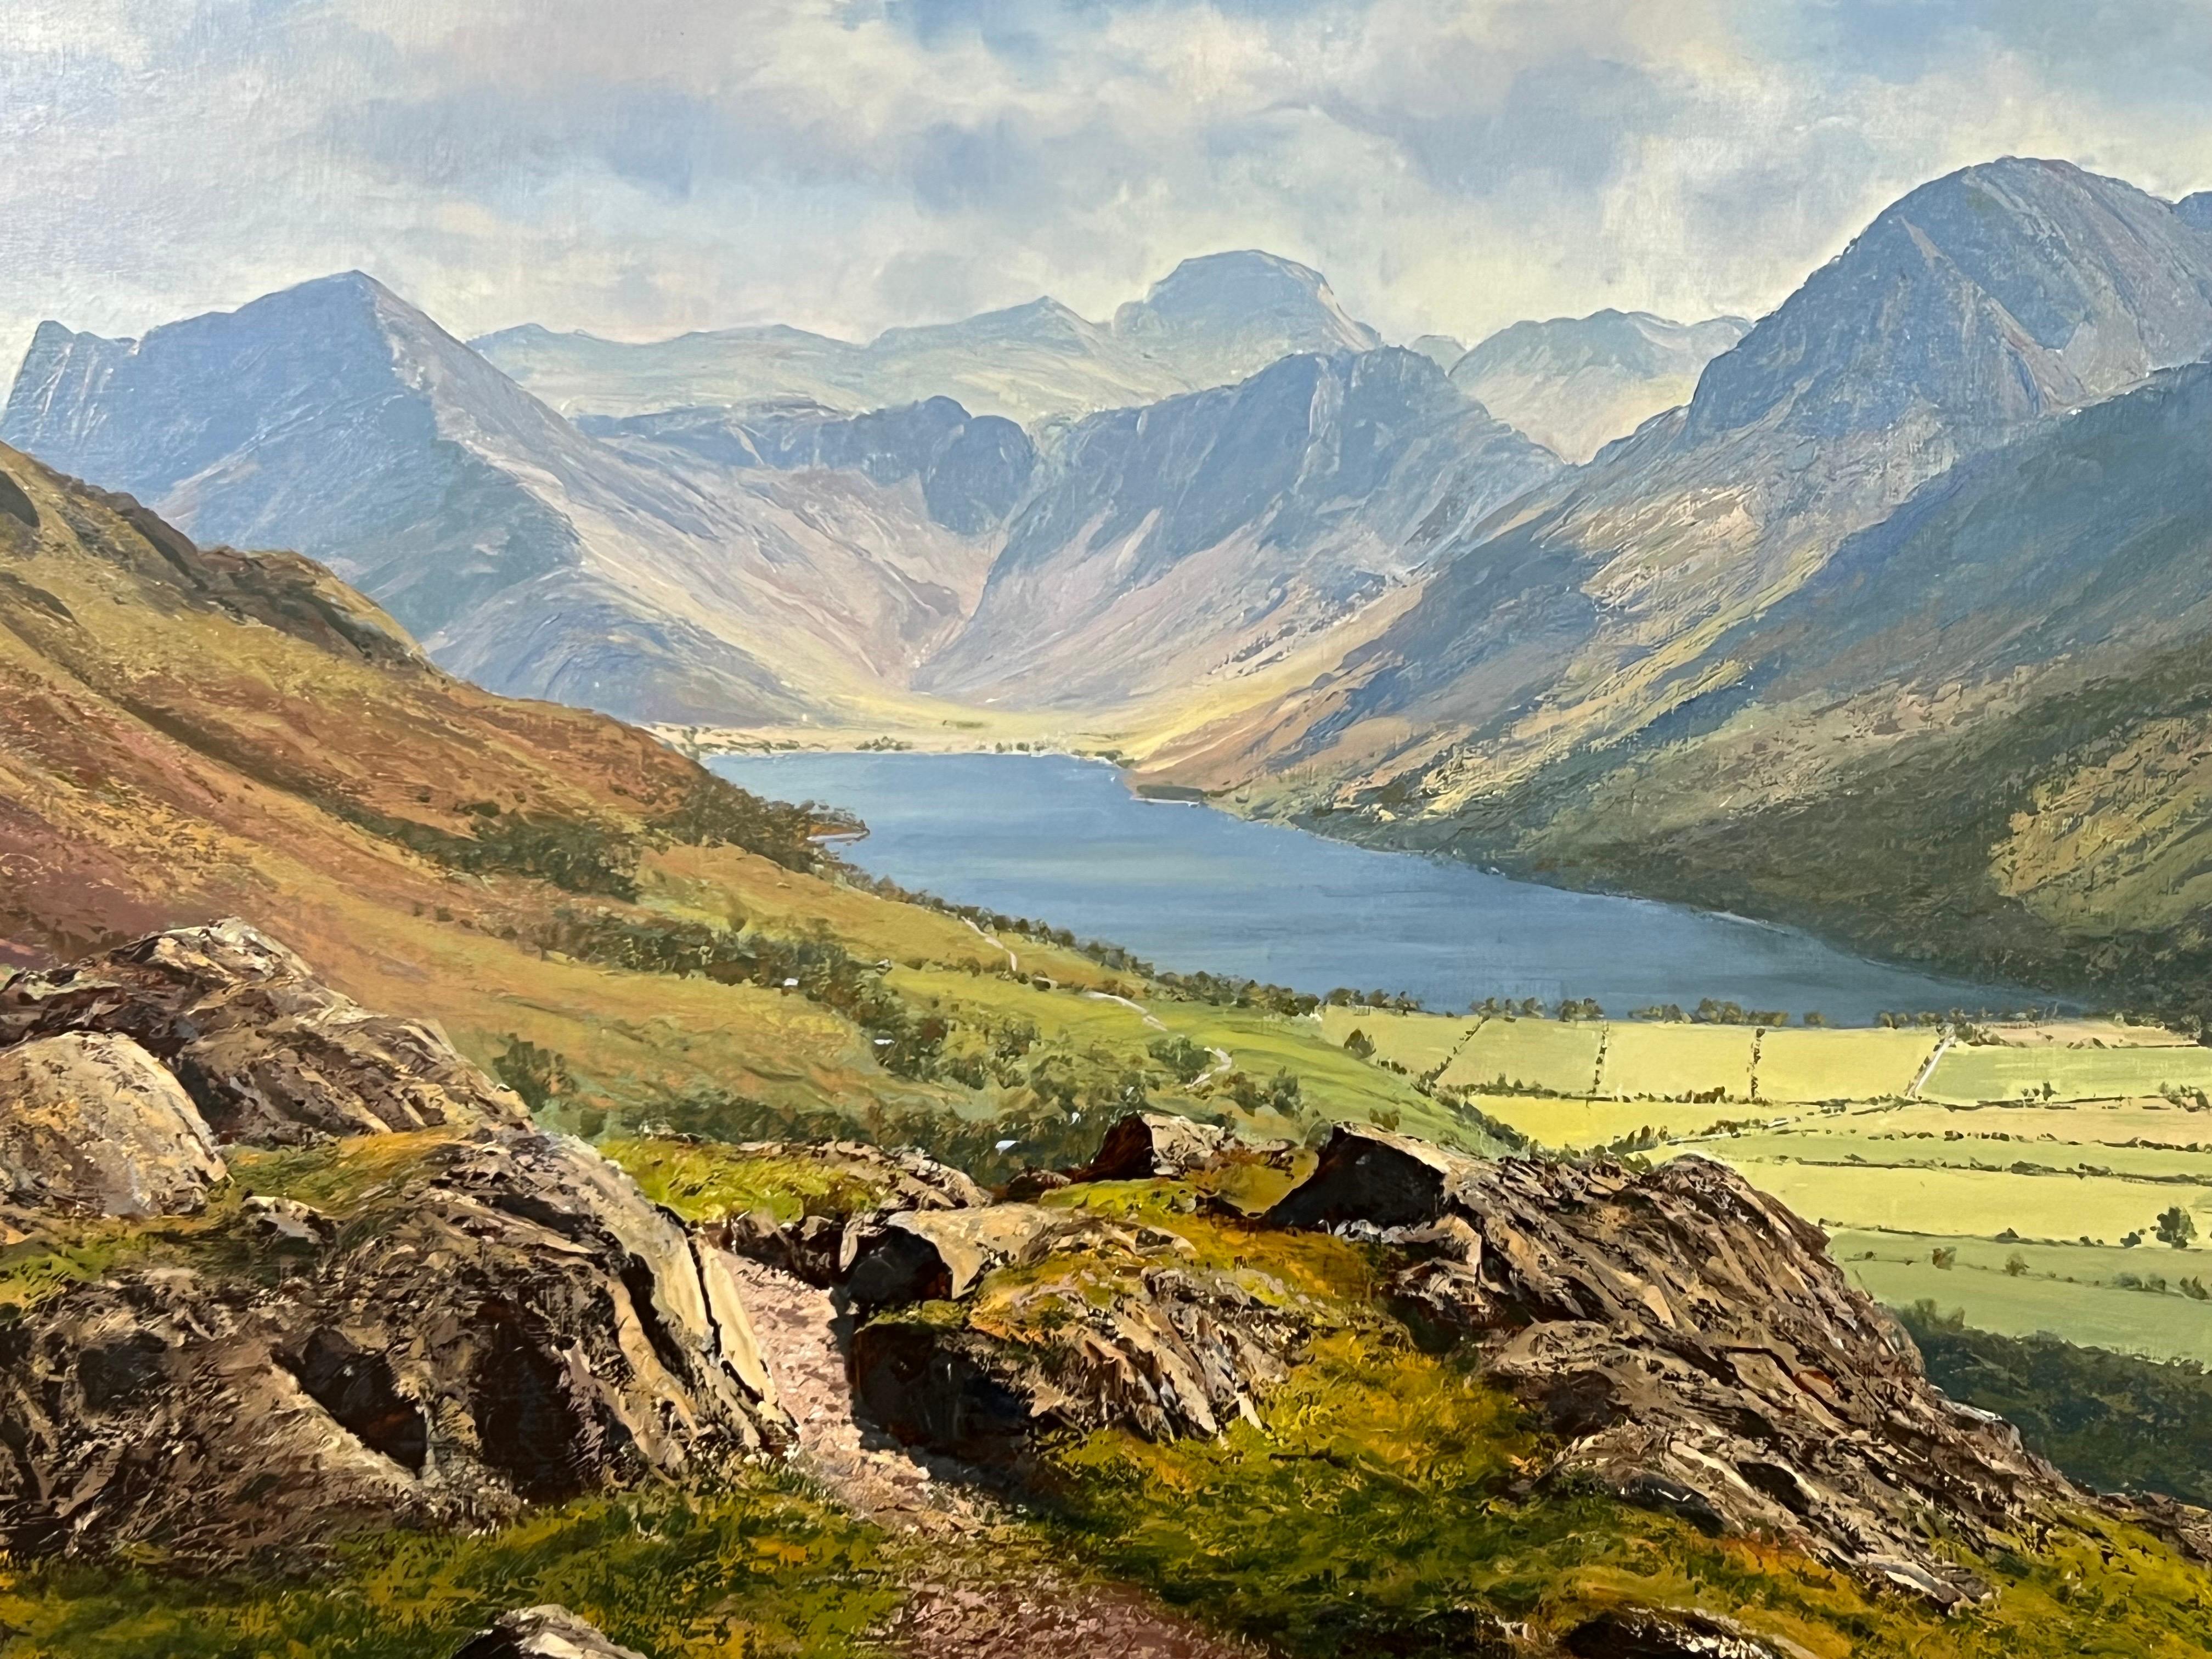 Oil Painting of Great Gable & the Buttermere Fells in English Lake District by 20th Century Modern British Landscape Artist, Arthur Terry Blamires (b. 1930)

Art measures 30 x 20 inches
Frame measure 35 x 25 inches

